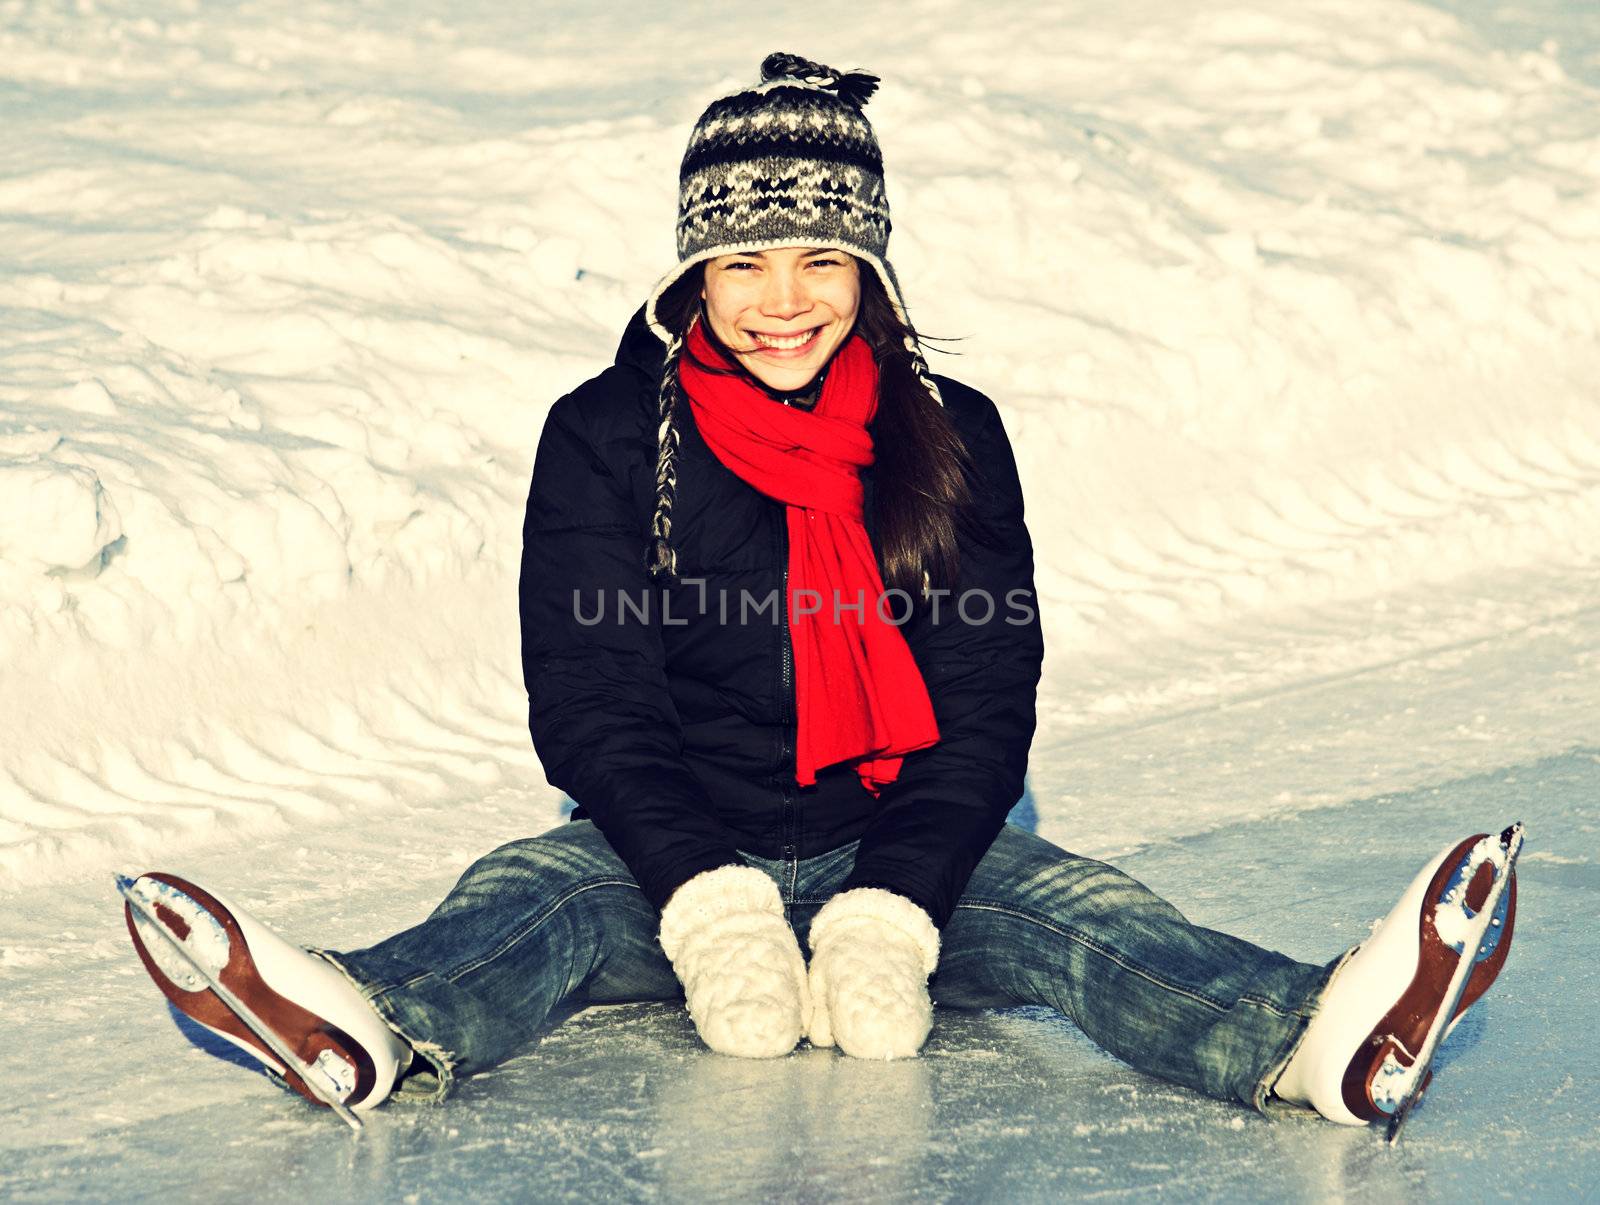 Ice skating woman sitting on the ice smiling.